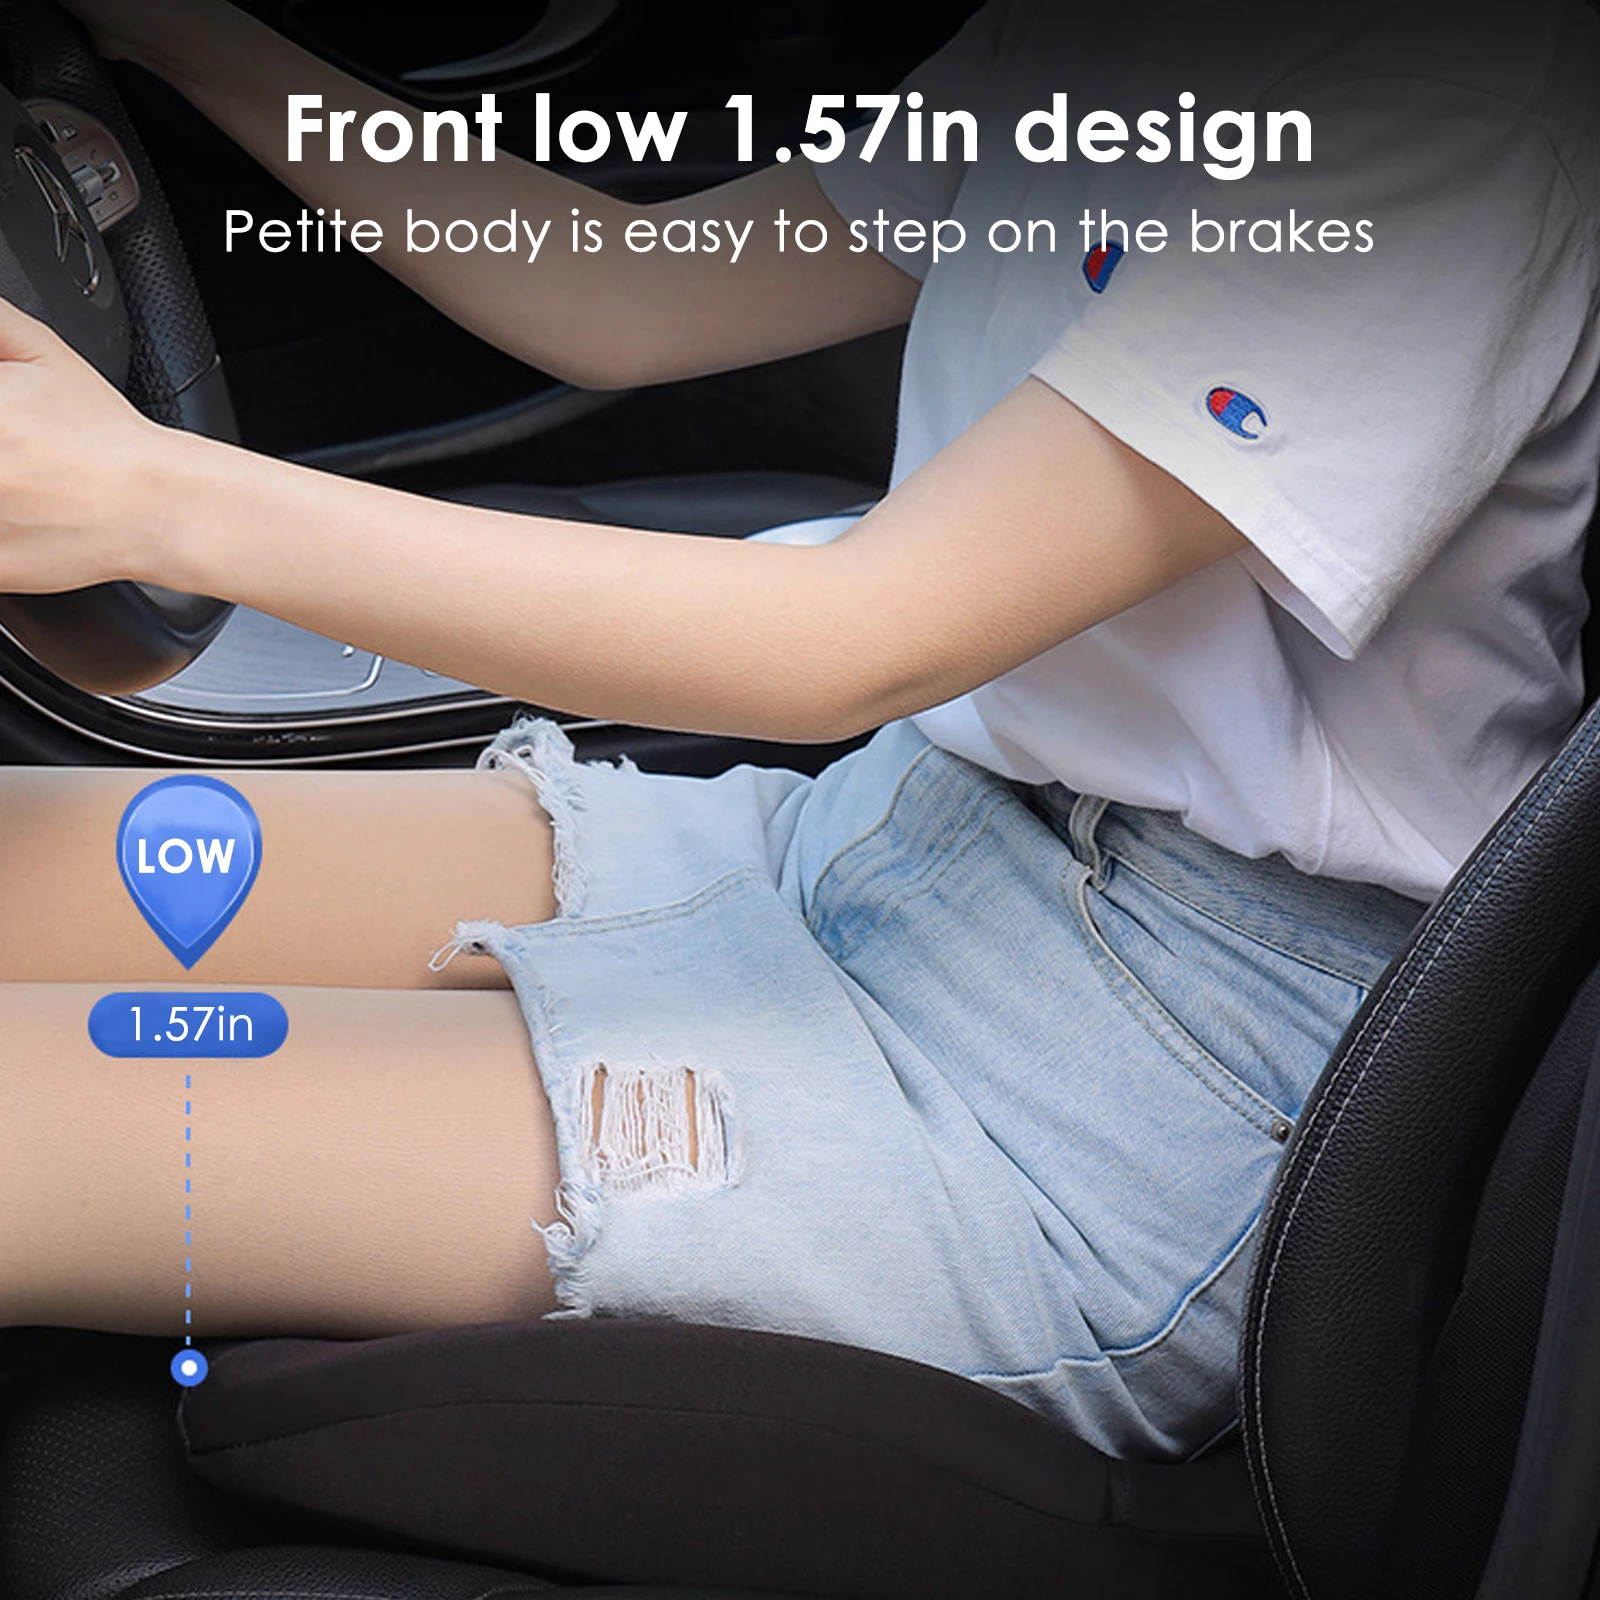 https://ae01.alicdn.com/kf/S5bef0bf15efc42b58b4b76ddfe5c64c9l/Car-Booster-Seat-Cushion-For-Driver-Hip-Pain-Raised-Memory-Foam-Height-Seat-Protector-Washable-Cover.jpg